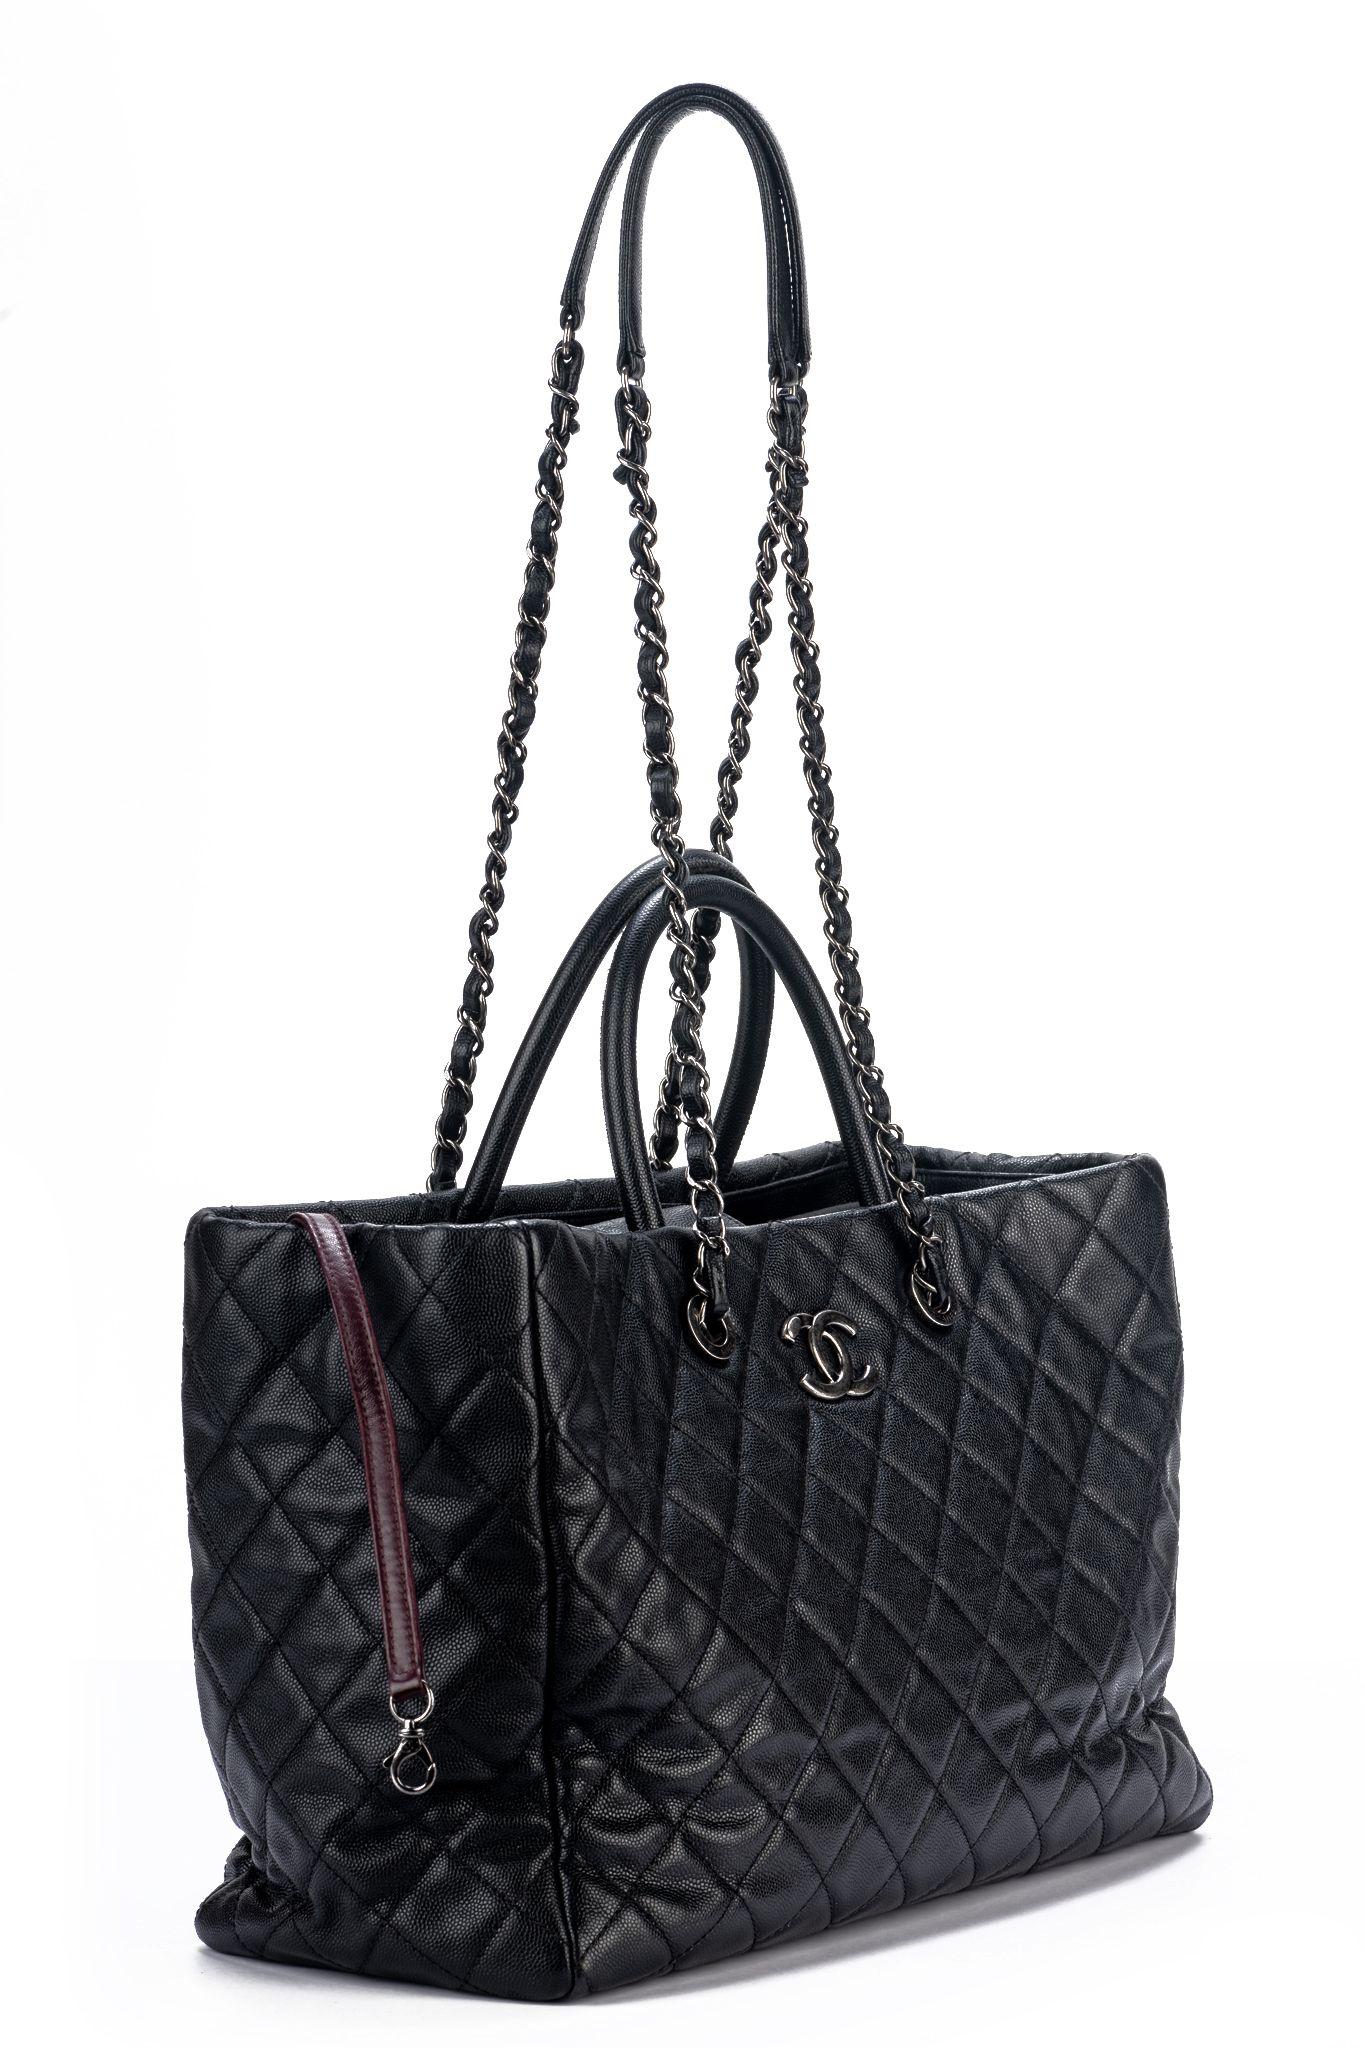 CHANEL large black 2 way caviar tote. Handle drop 4.5”, shoulder drop 14”. Interior detachable center pouch. Key strap.Interior zipped pocket. Back open pocket. Comes with hologram, ID card and original dust cover. Collection 23.